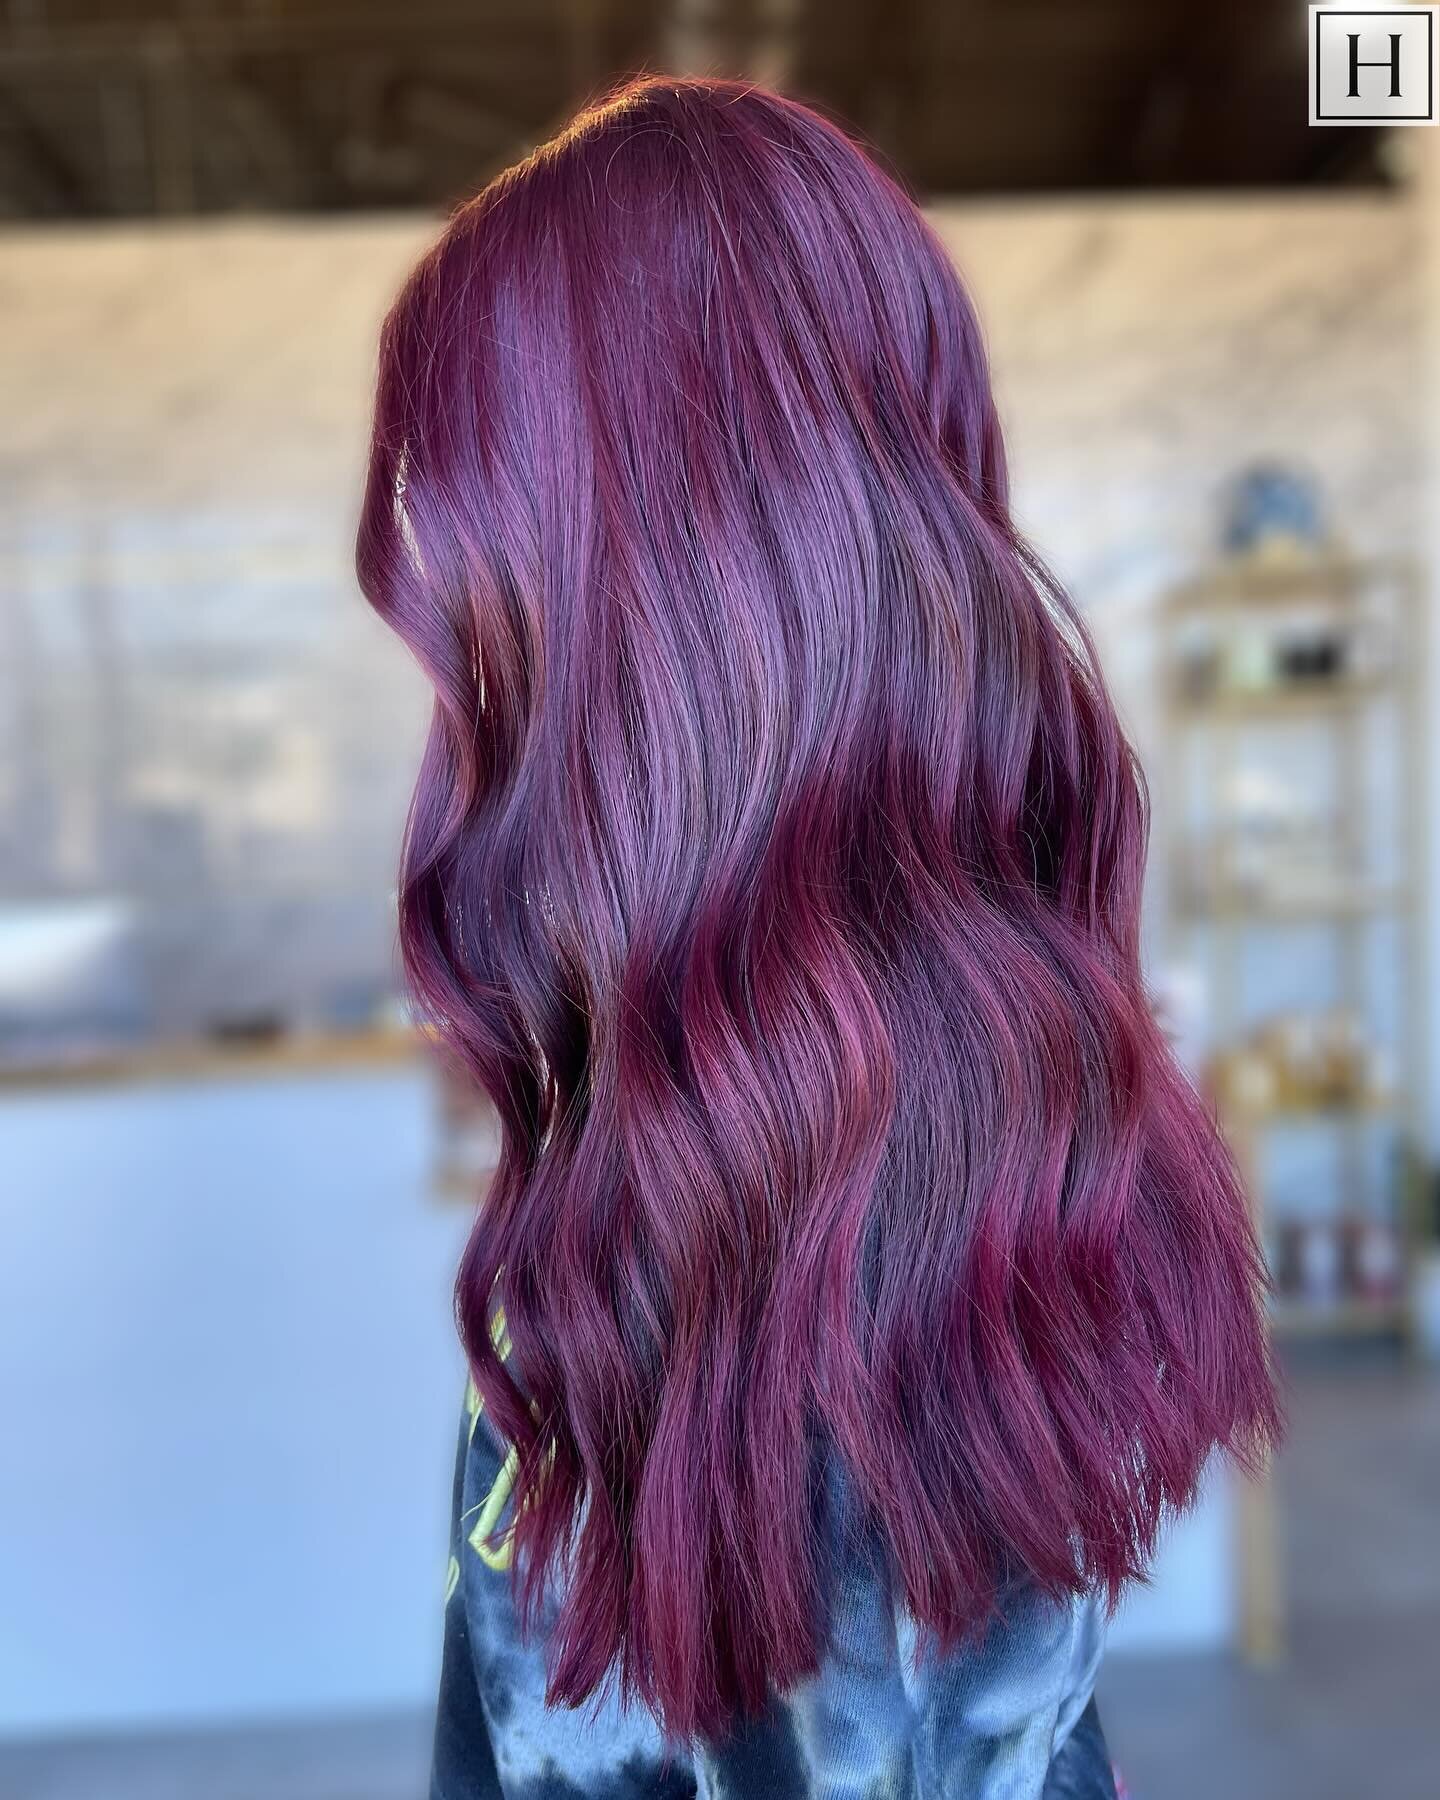 O!! M!! G!! ❤️💜🩷❤️💜🩷

Stylist: @hairby.megb 

#hair #hairstylist #hairsalon #hydesalon #hydechapin #chapinsc #chapincommons #lakemurray #lakemurraysc #lakemurraycountry #lakelife #fashioncolors #valentinesday